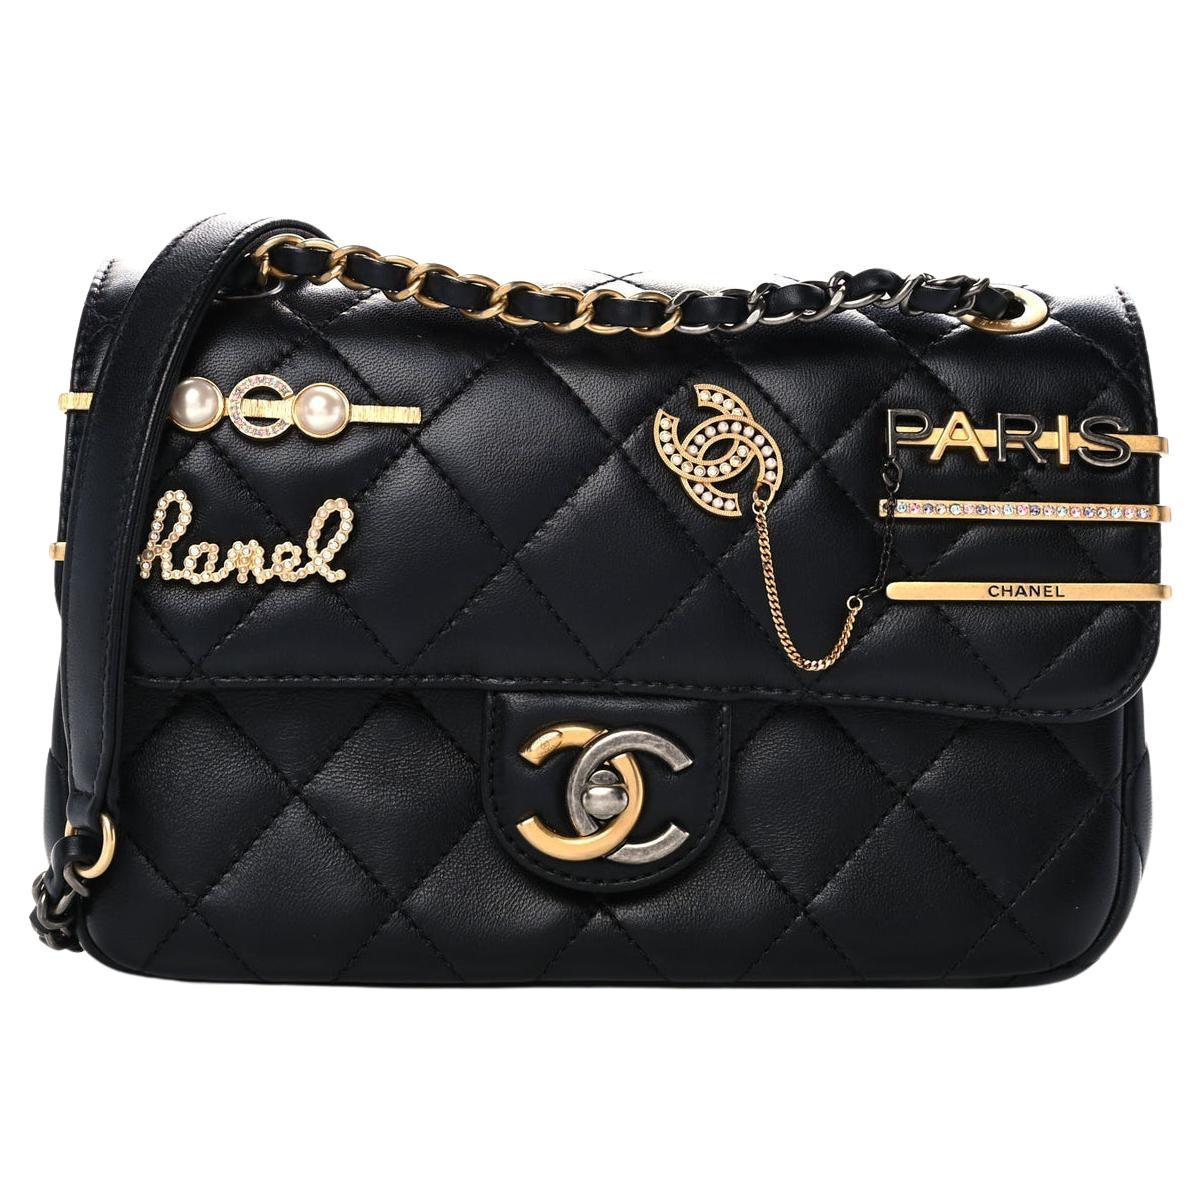 Chanel Cruise Charm Limited Edition Quilted Bag  Handbags  Purses   Costume  Dressing Accessories